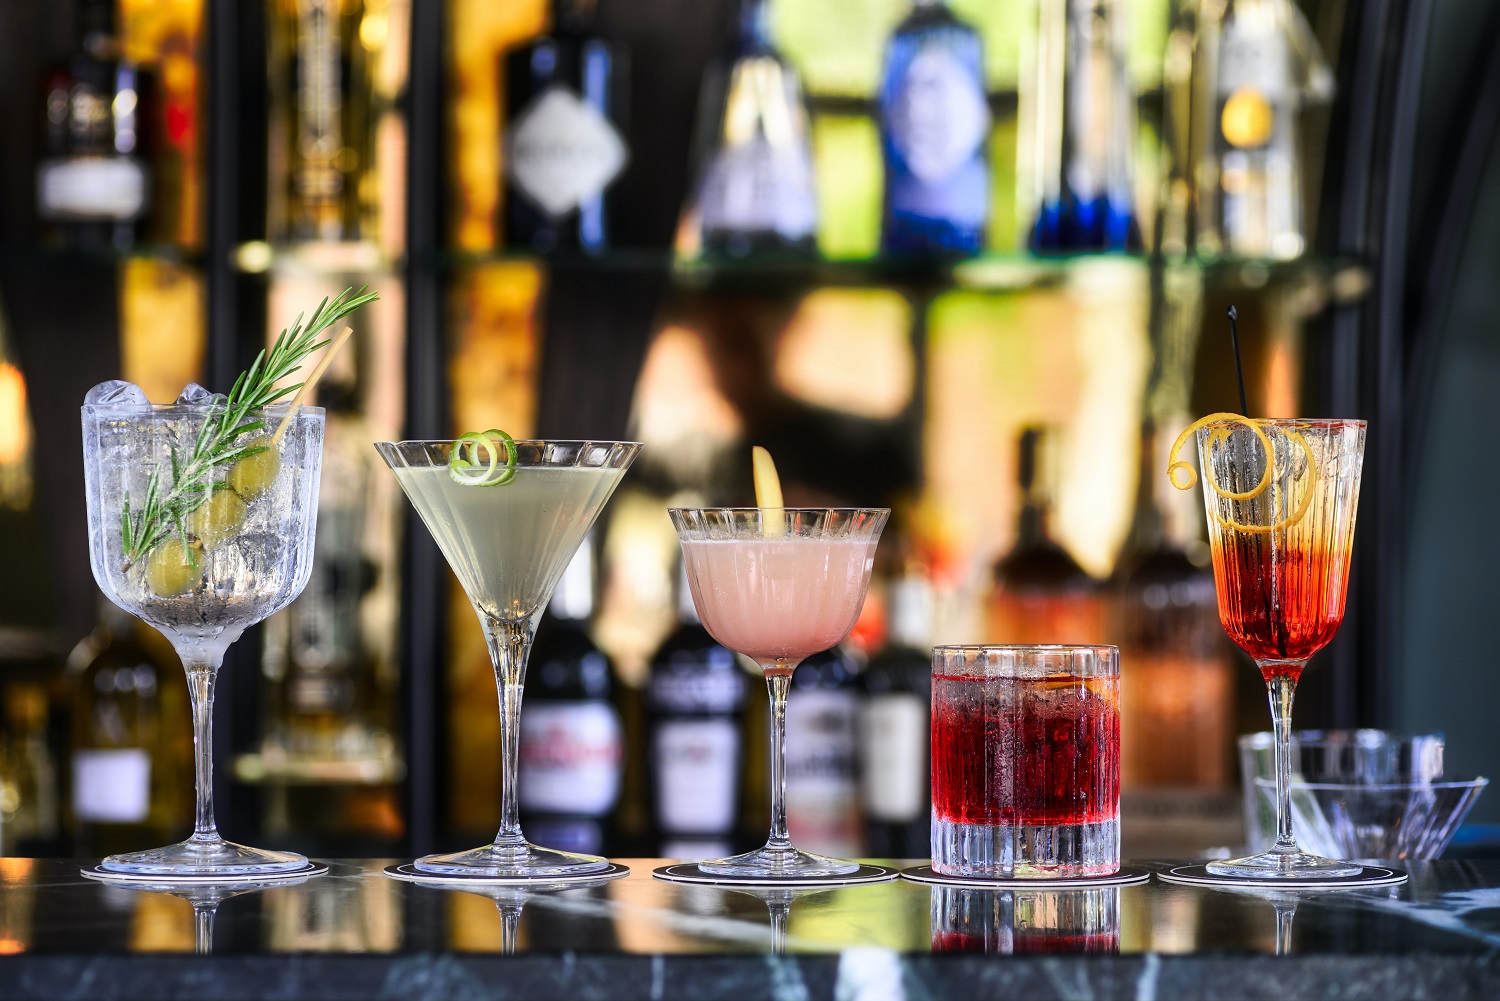 Italian spirits and the modern bar – it’s amore!